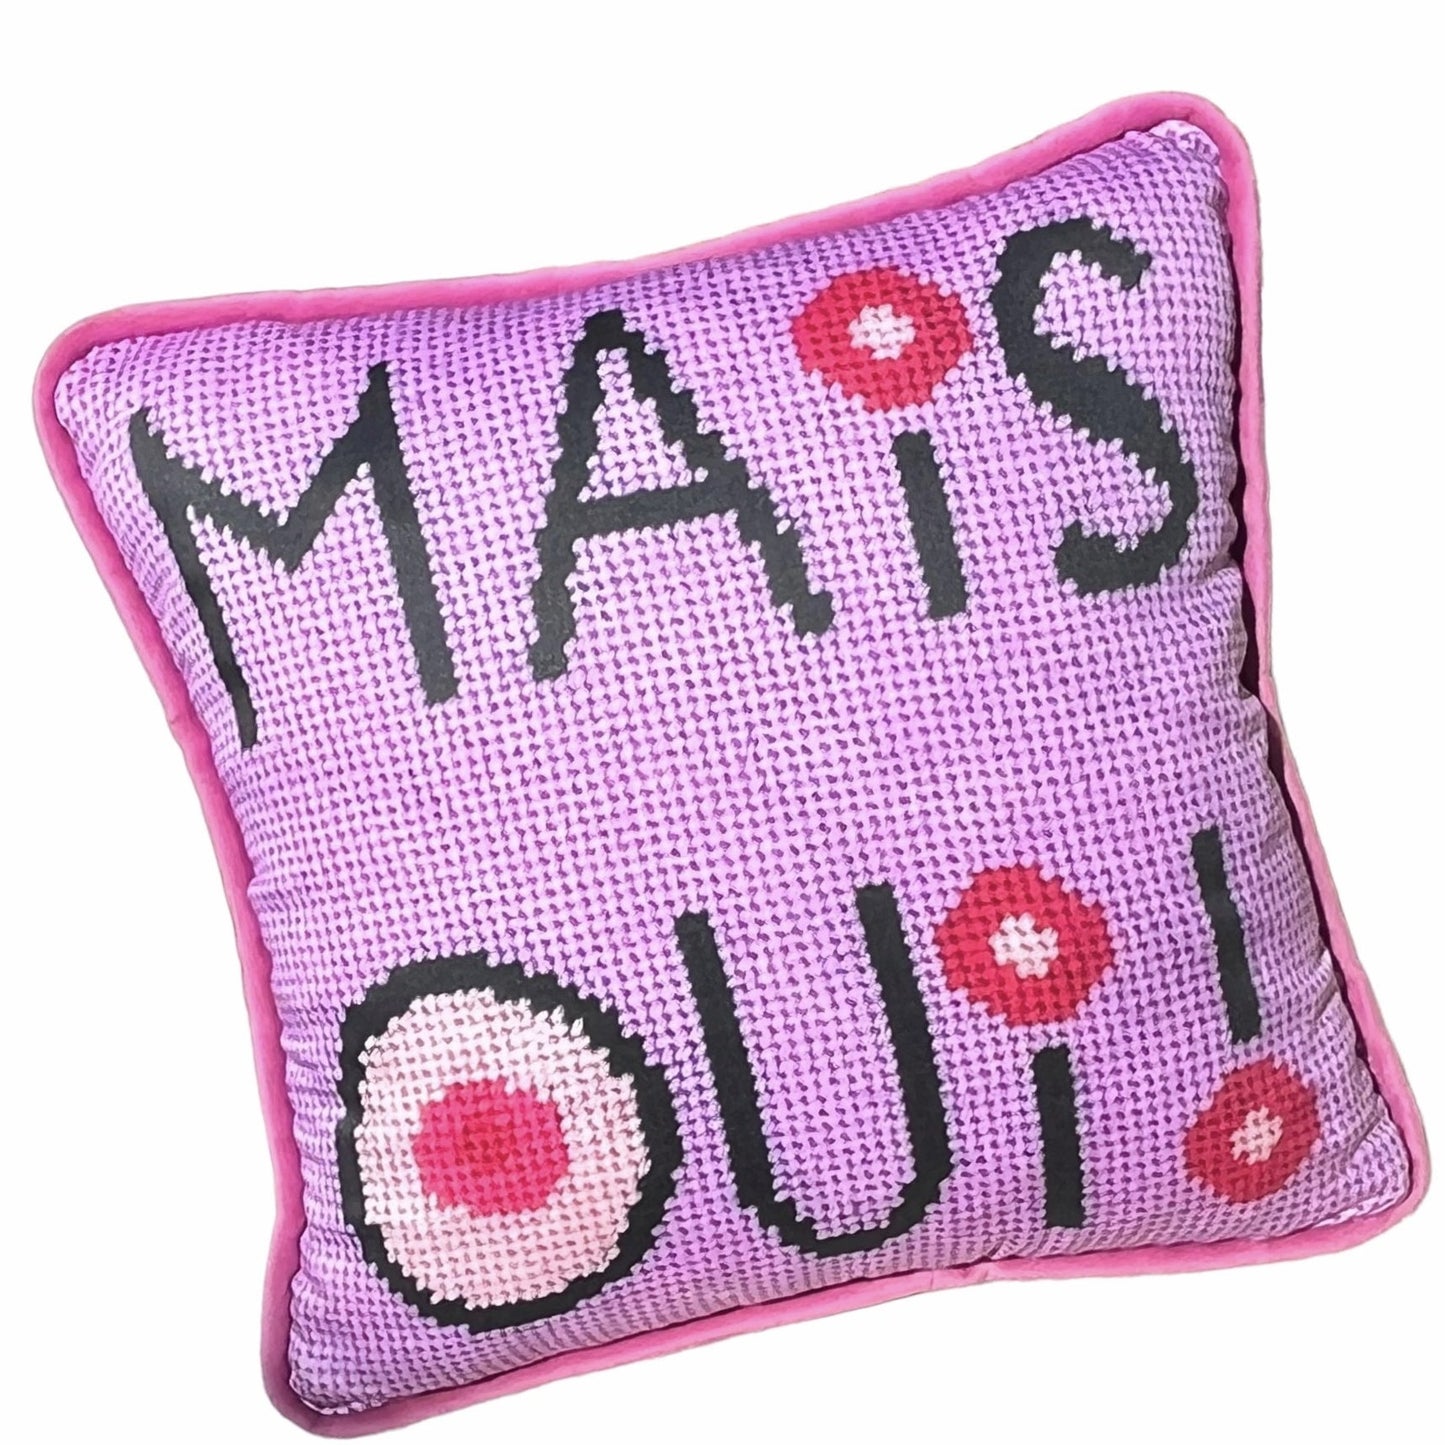 mais oui black stacked text with I dot and O that have cream colored centers with pink circles. Lavender pick background.